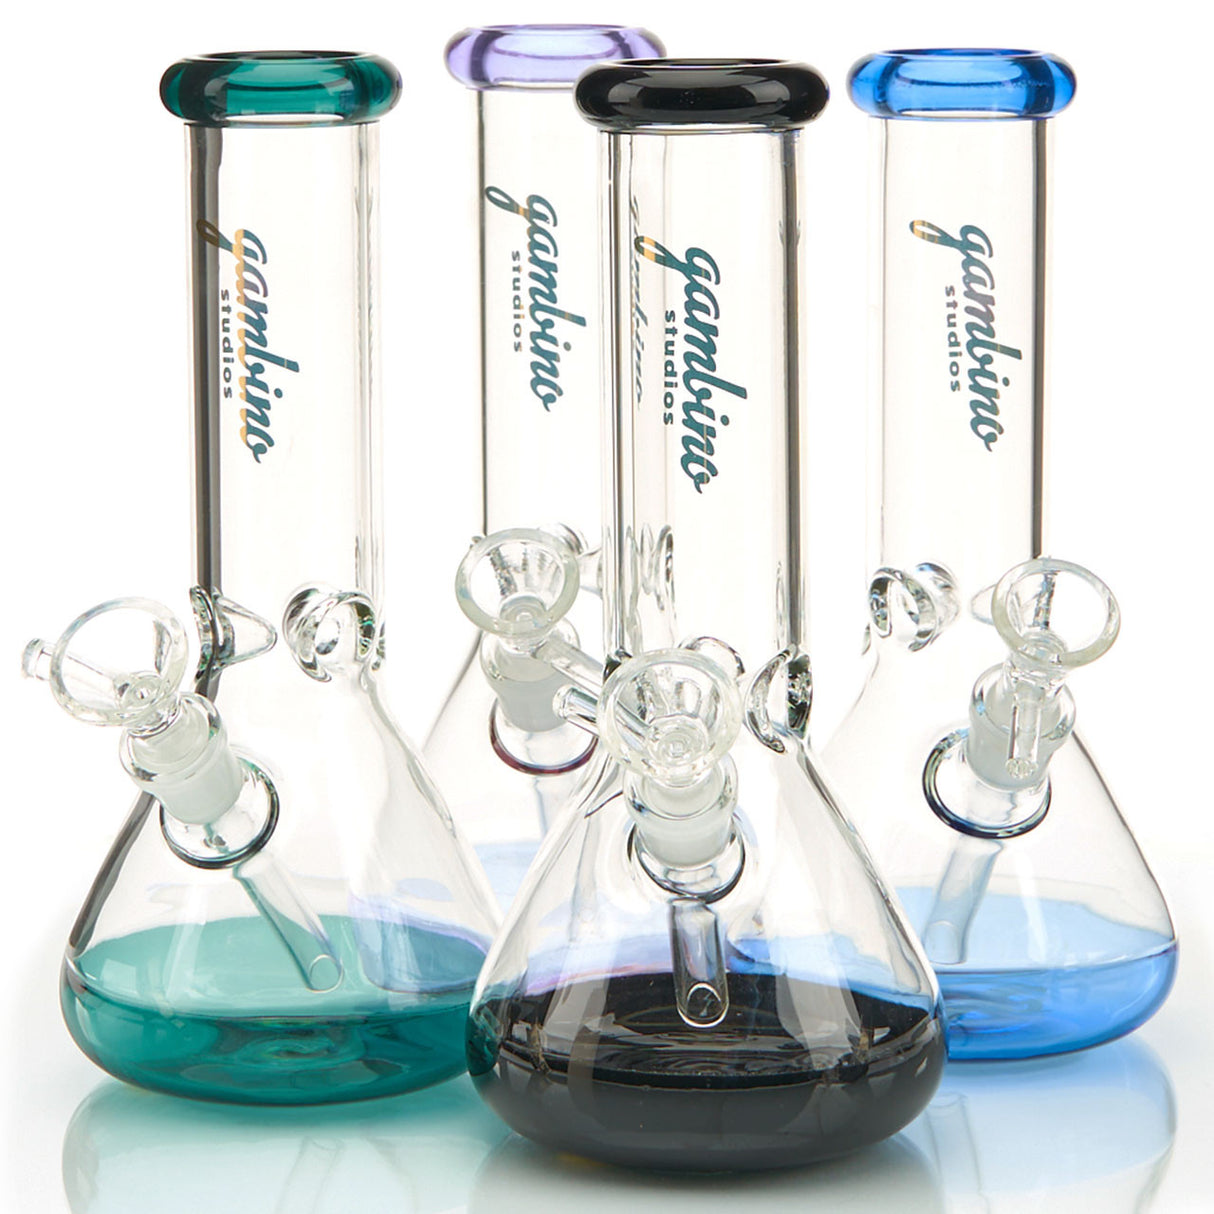 Gambino Studios The 45 Beaker Base Water Pipe with colored base and mouthpiece